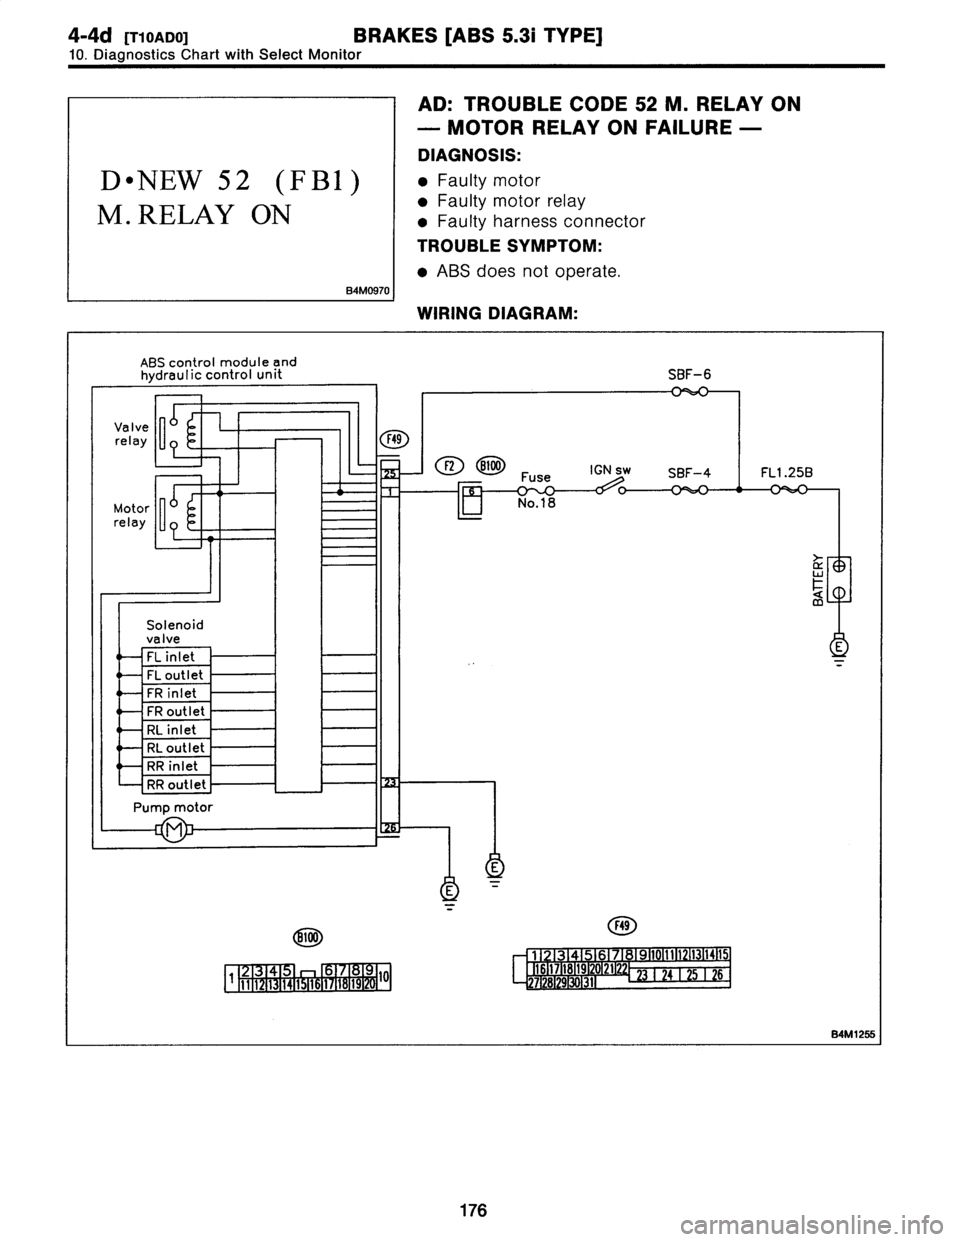 SUBARU LEGACY 1997  Service Owners Guide 
4-4d
[r1oaDo1
BRAKES
[ABS
5
.31
TYPE]

10
.
Diagnostics
Chart
withSelect
Monitor

D
"
NEW
52
(FBI)

M
.
RELAY
ON

B4M0970

AD
:
TROUBLE
CODE
52
M
.
RELAY
ON

-
MOTOR
RELAY
ON
FAILURE
-

DIAGNOSIS